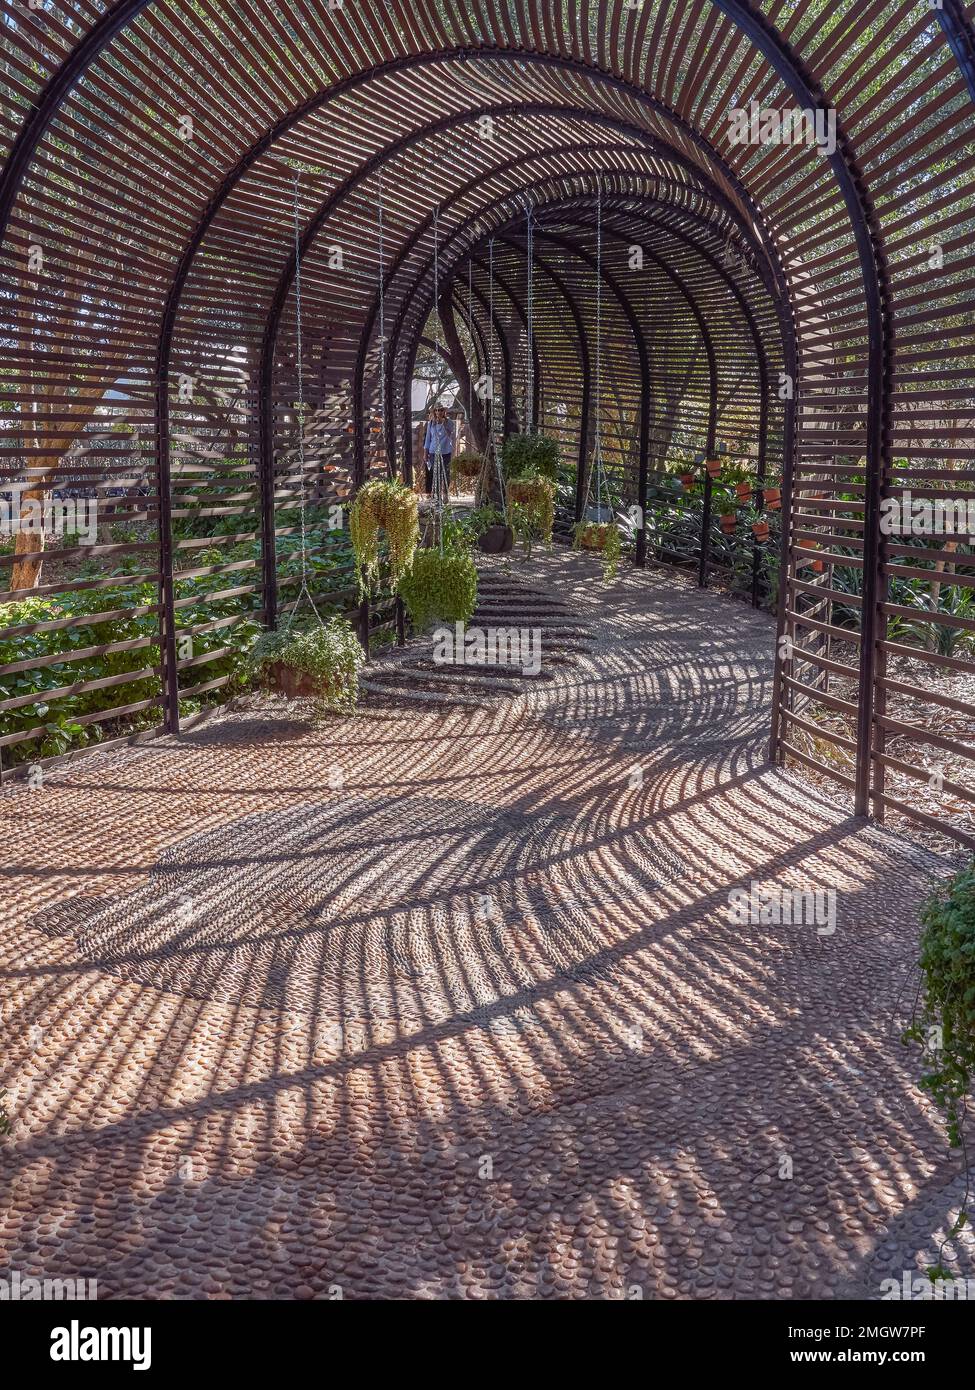 An Arched walk way made of metal and wood in a garden in Cape Town  South Africa Stock Photo